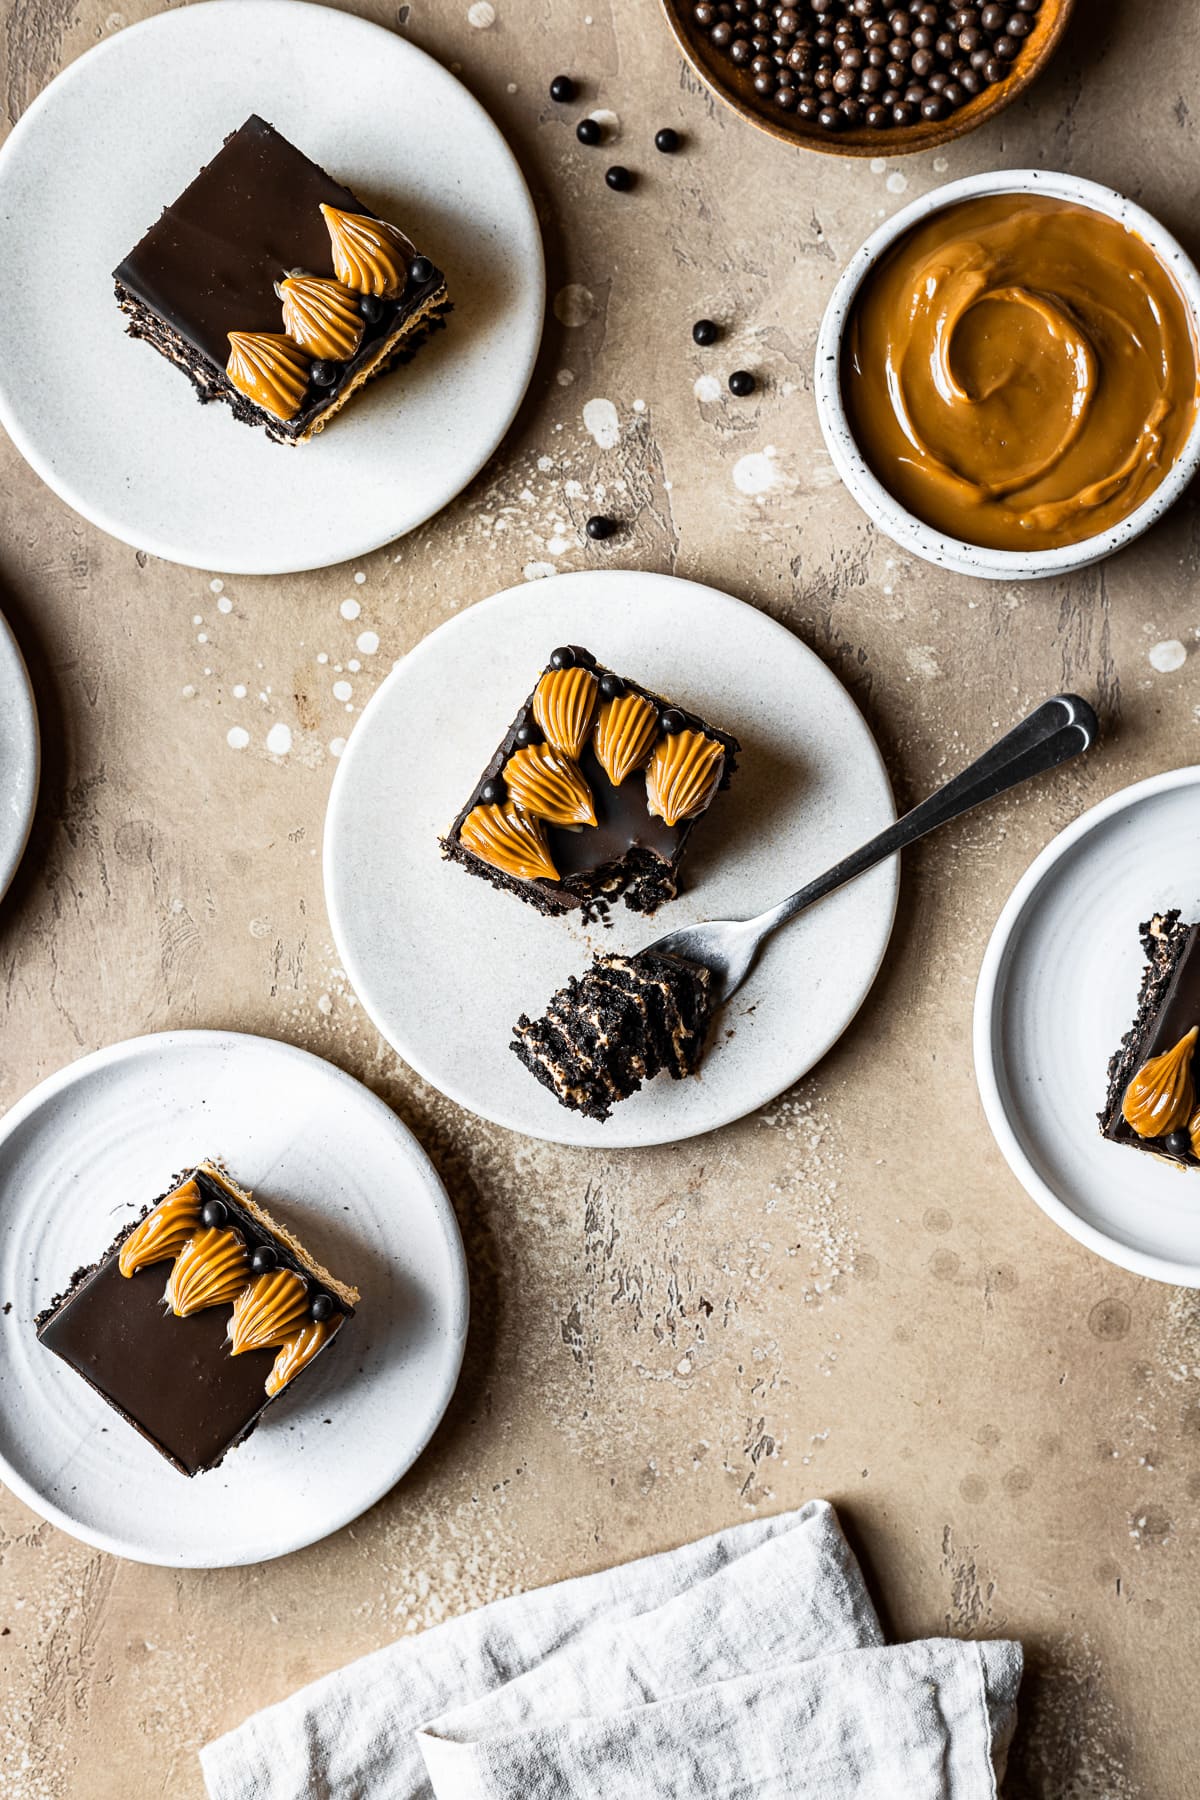 Square slices of chocolate dulce de leche icebox cake on white ceramic plates on a tan stone surface. One slice has a bite of cake resting on a fork. Bowls of chocolate pearls and dulce de leche are at top left. A tan linen napkin rests at bottom.